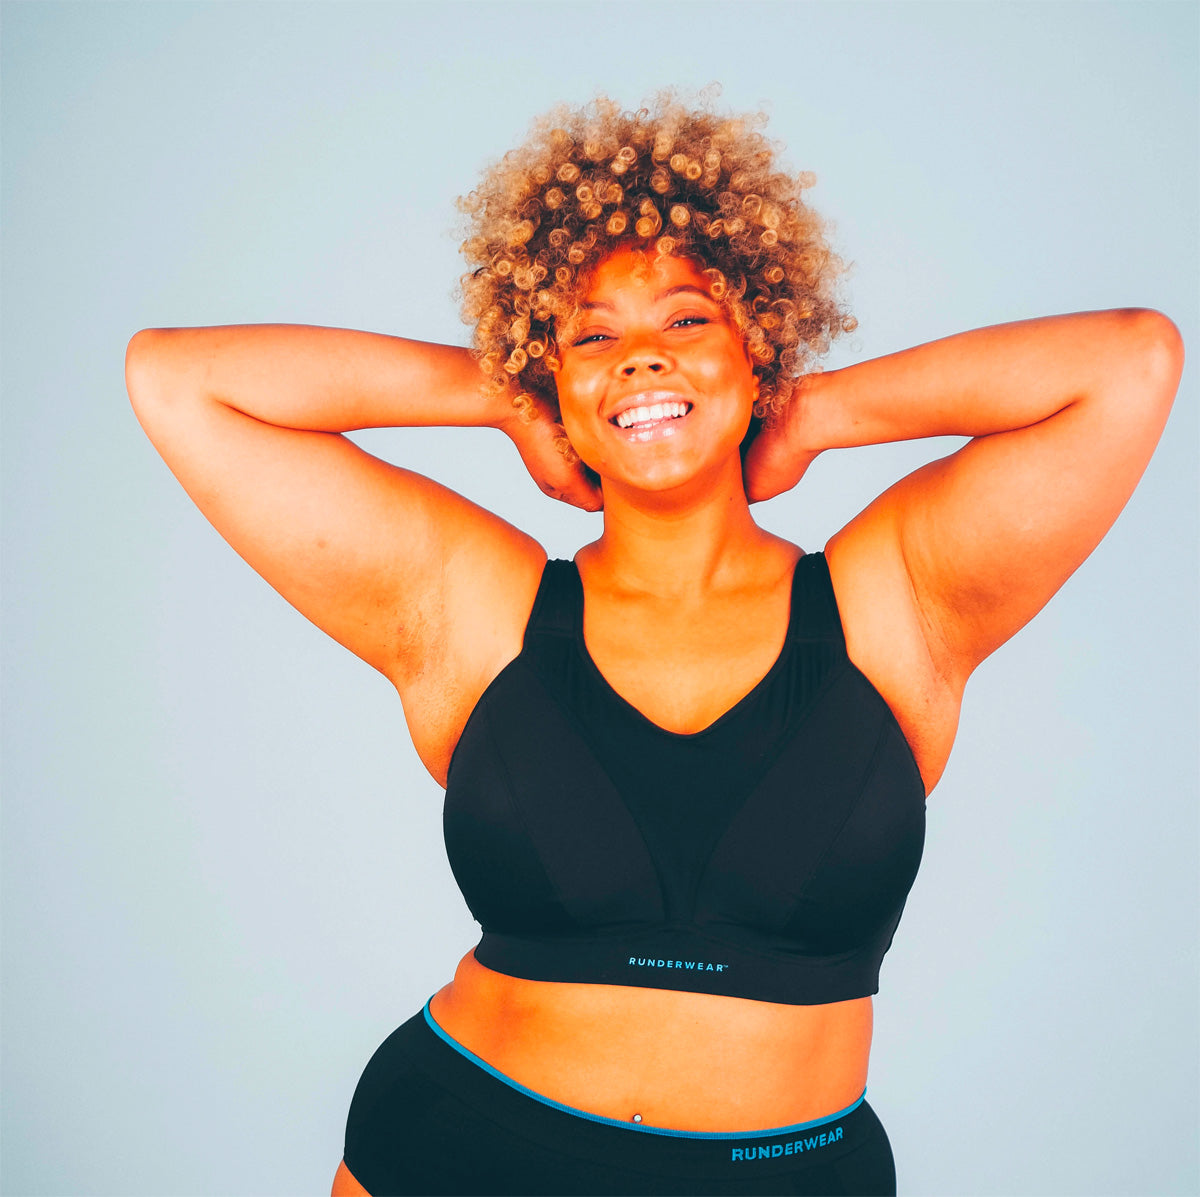 10 Of The Best DD Cup Size Sports Bras Out There - The B-Word Blog